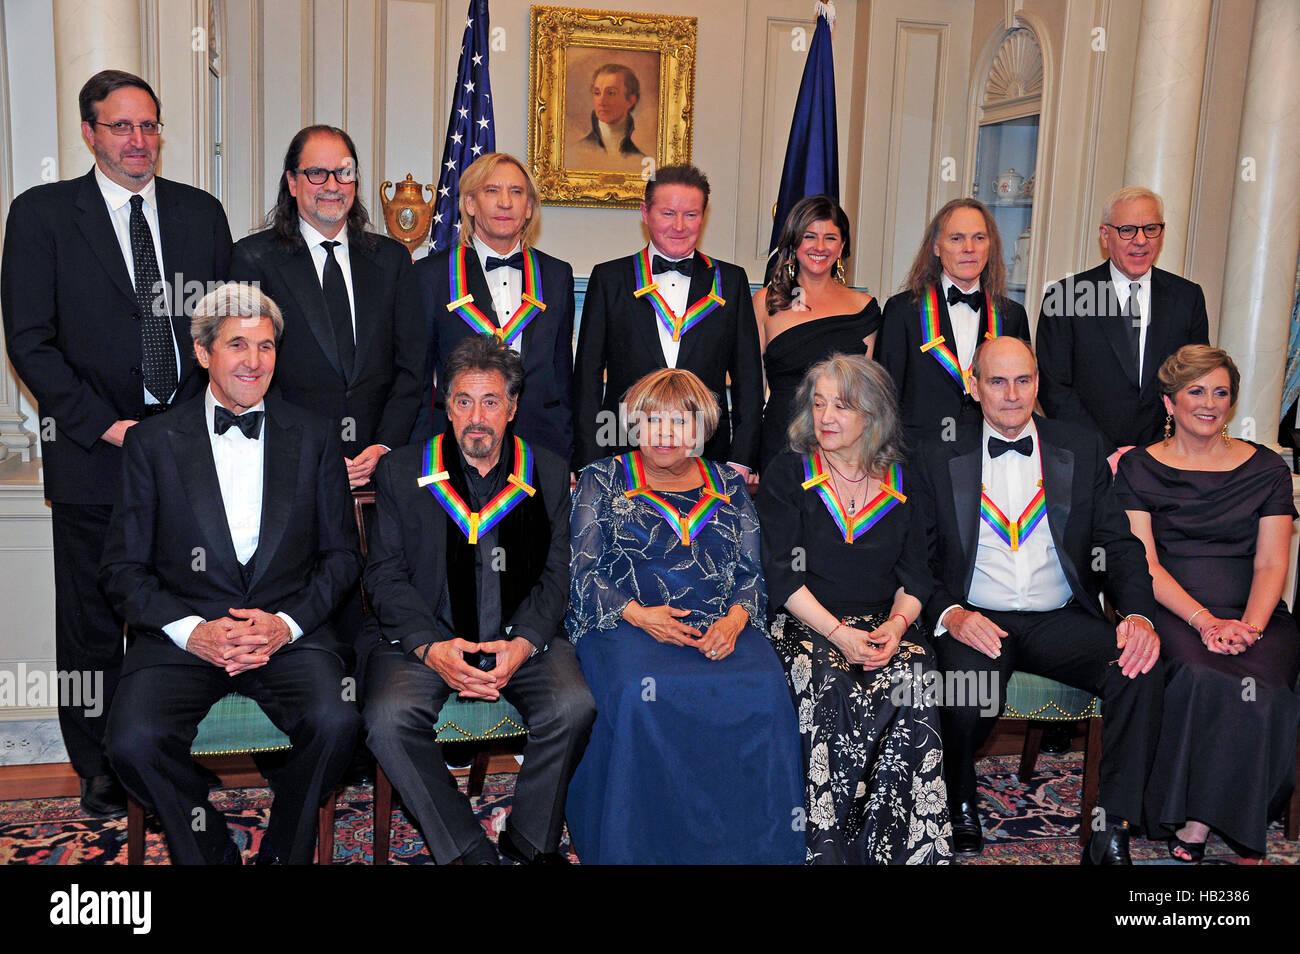 The five recipients of the 39th Annual Kennedy Center Honors pose for a group photo following a dinner hosted by United States Secretary of State John F. Kerry in their honor at the U.S. Department of State in Washington, DC on Saturday, December 3, 2016. The 2016 honorees are: Argentine pianist Martha Argerich; rock band the Eagles; screen and stage actor Al Pacino; gospel and blues singer Mavis Staples; and musician James Taylor. From left to right back row: Ricky Kirshner, Glenn Weiss, Joe Walsh, Don Henley, Cindy Frey, wife of Glenn Frey, who passed away earlier this year, and Timothy B. Stock Photo